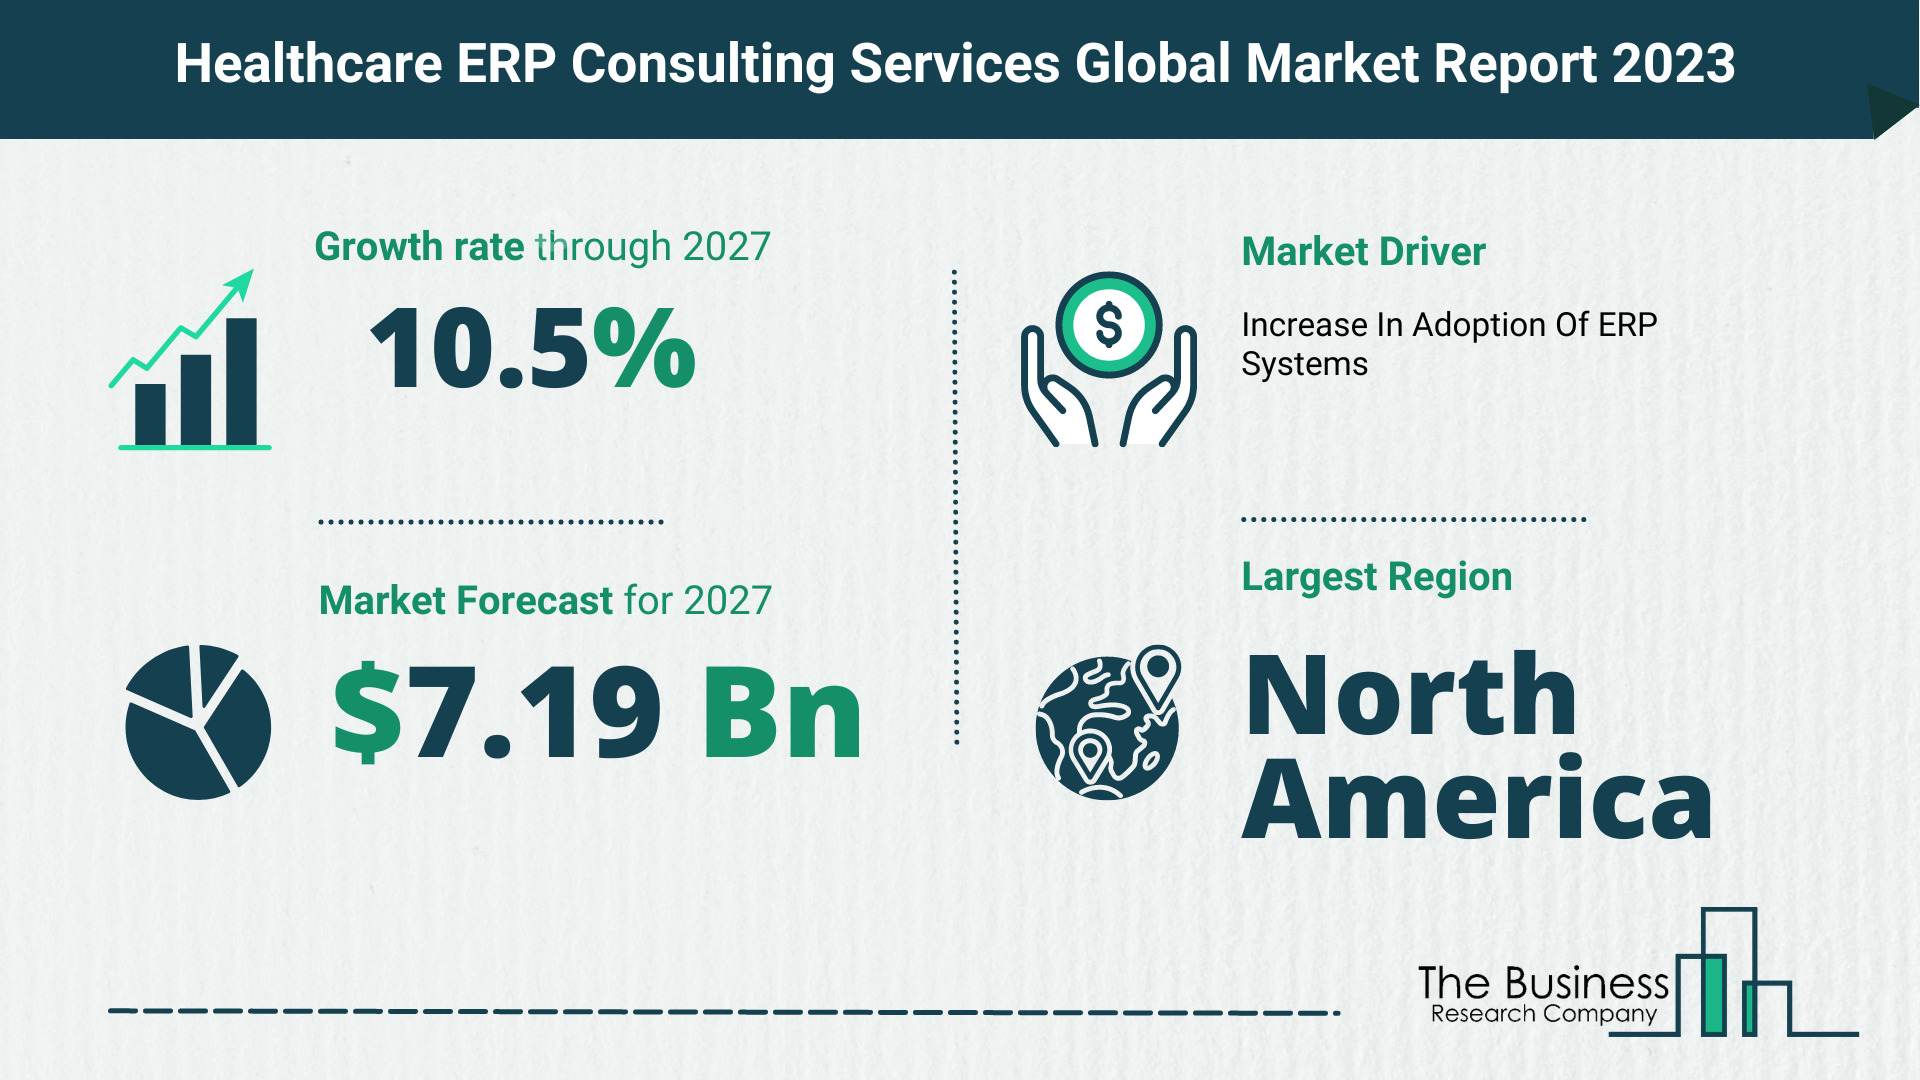 Global Healthcare ERP Consulting Services Market Size